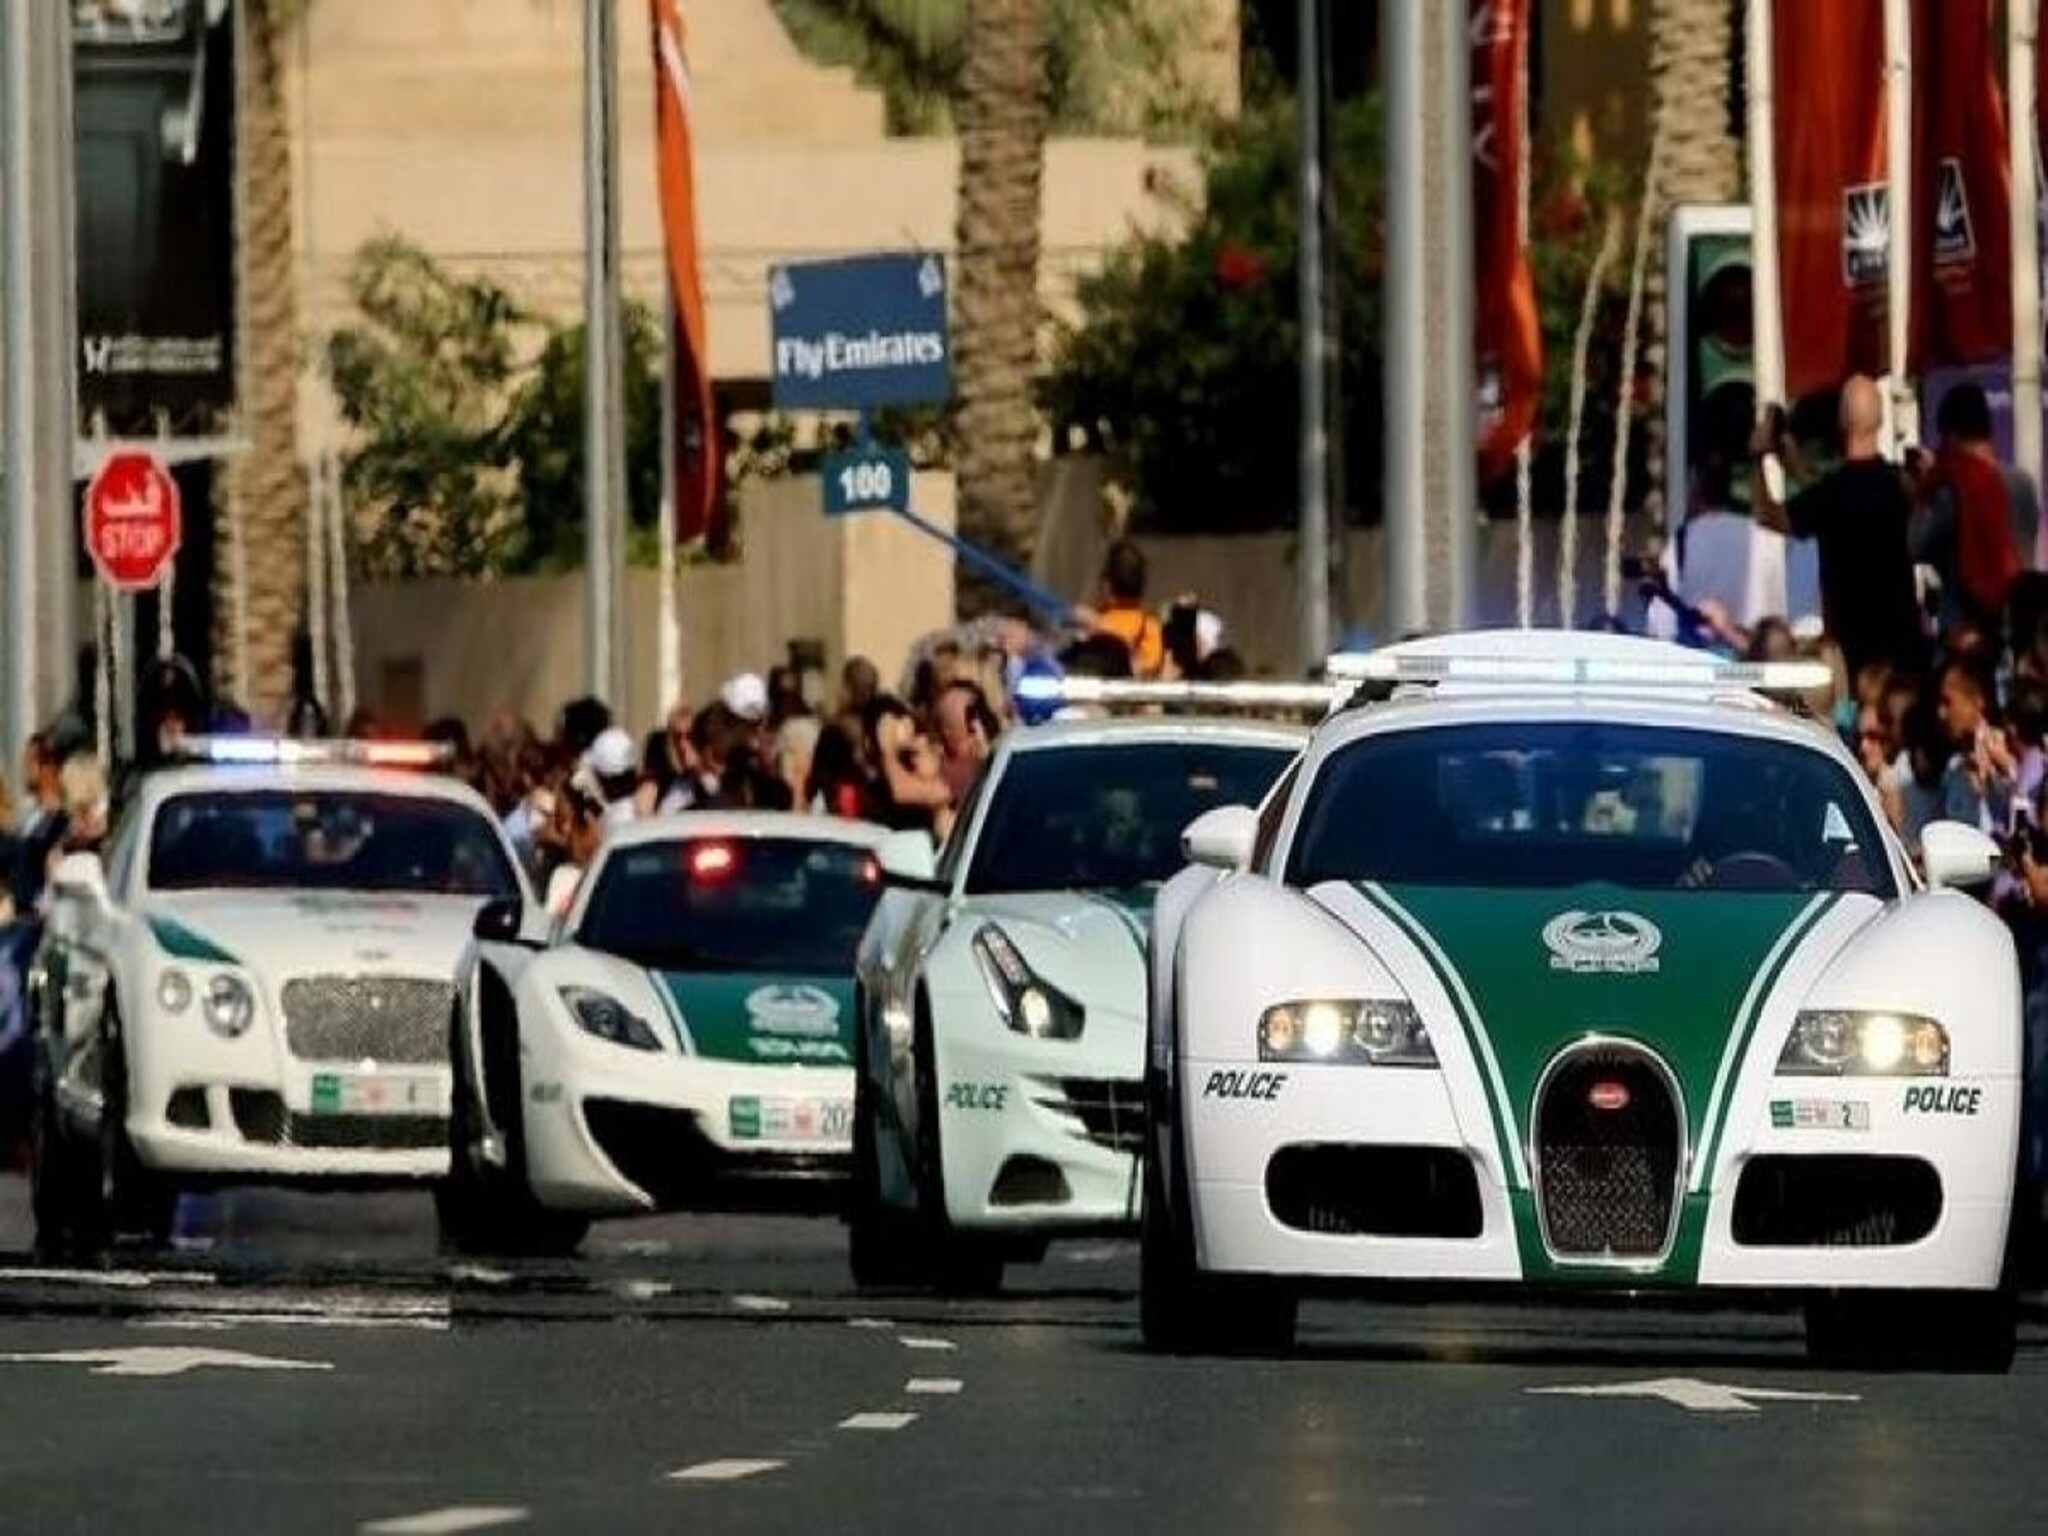 The Dubai Police launched an initiative to repair 400 cars free of charge for drivers